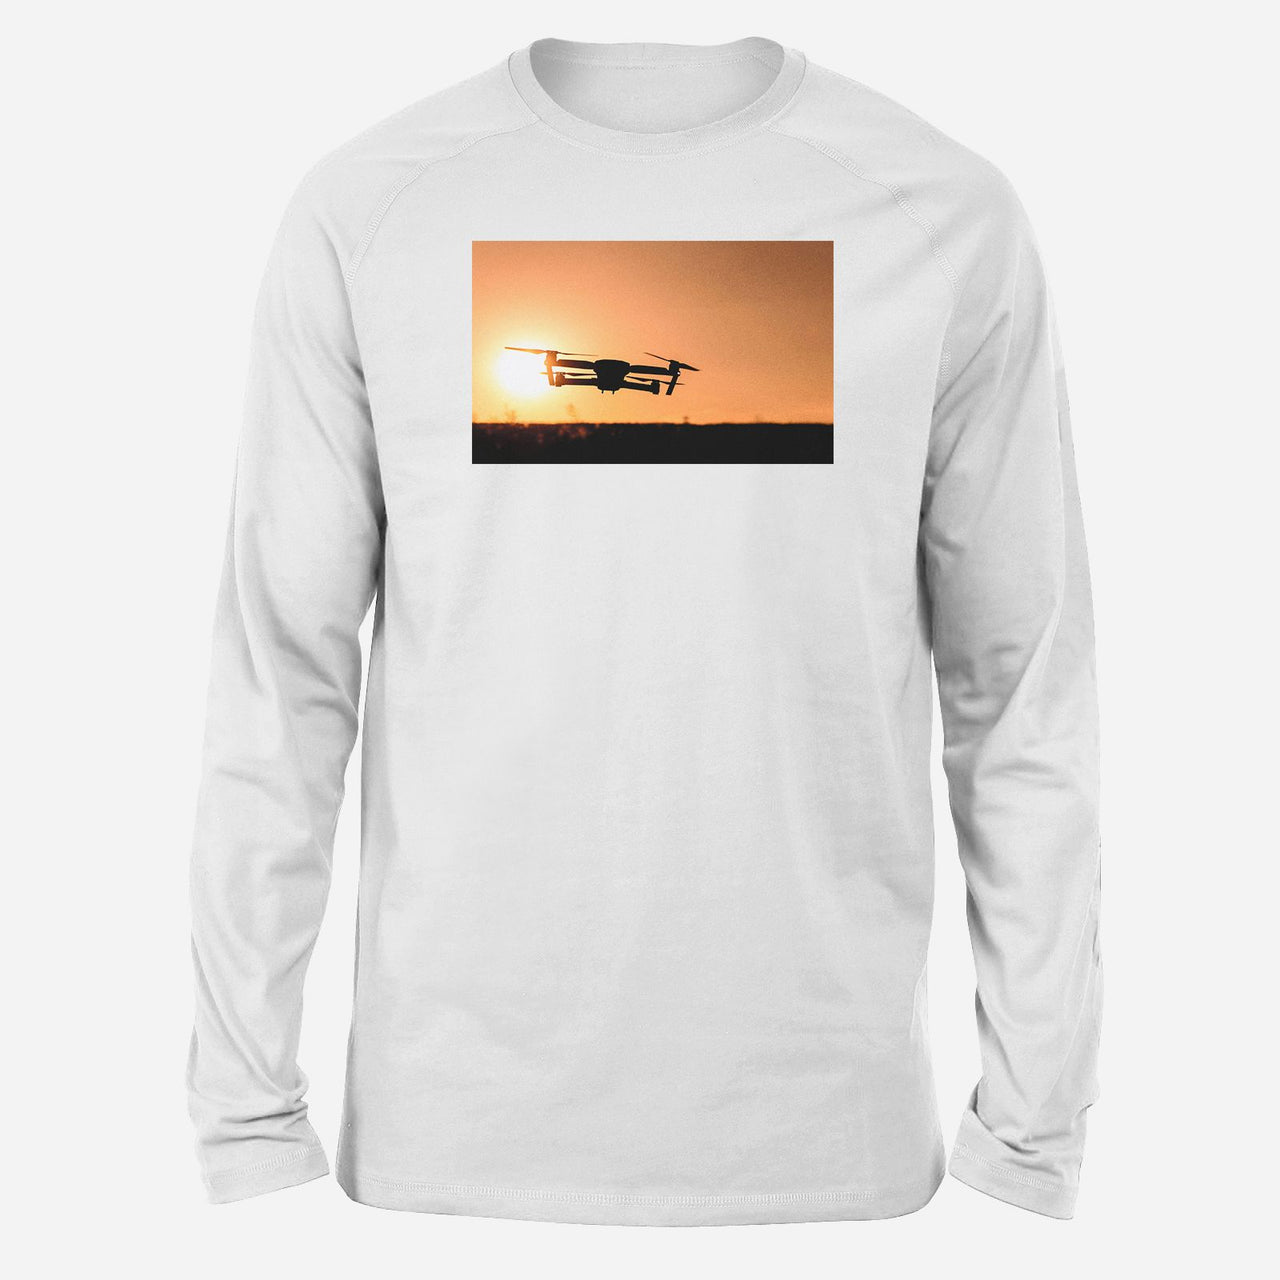 Amazing Drone in Sunset Designed Long-Sleeve T-Shirts